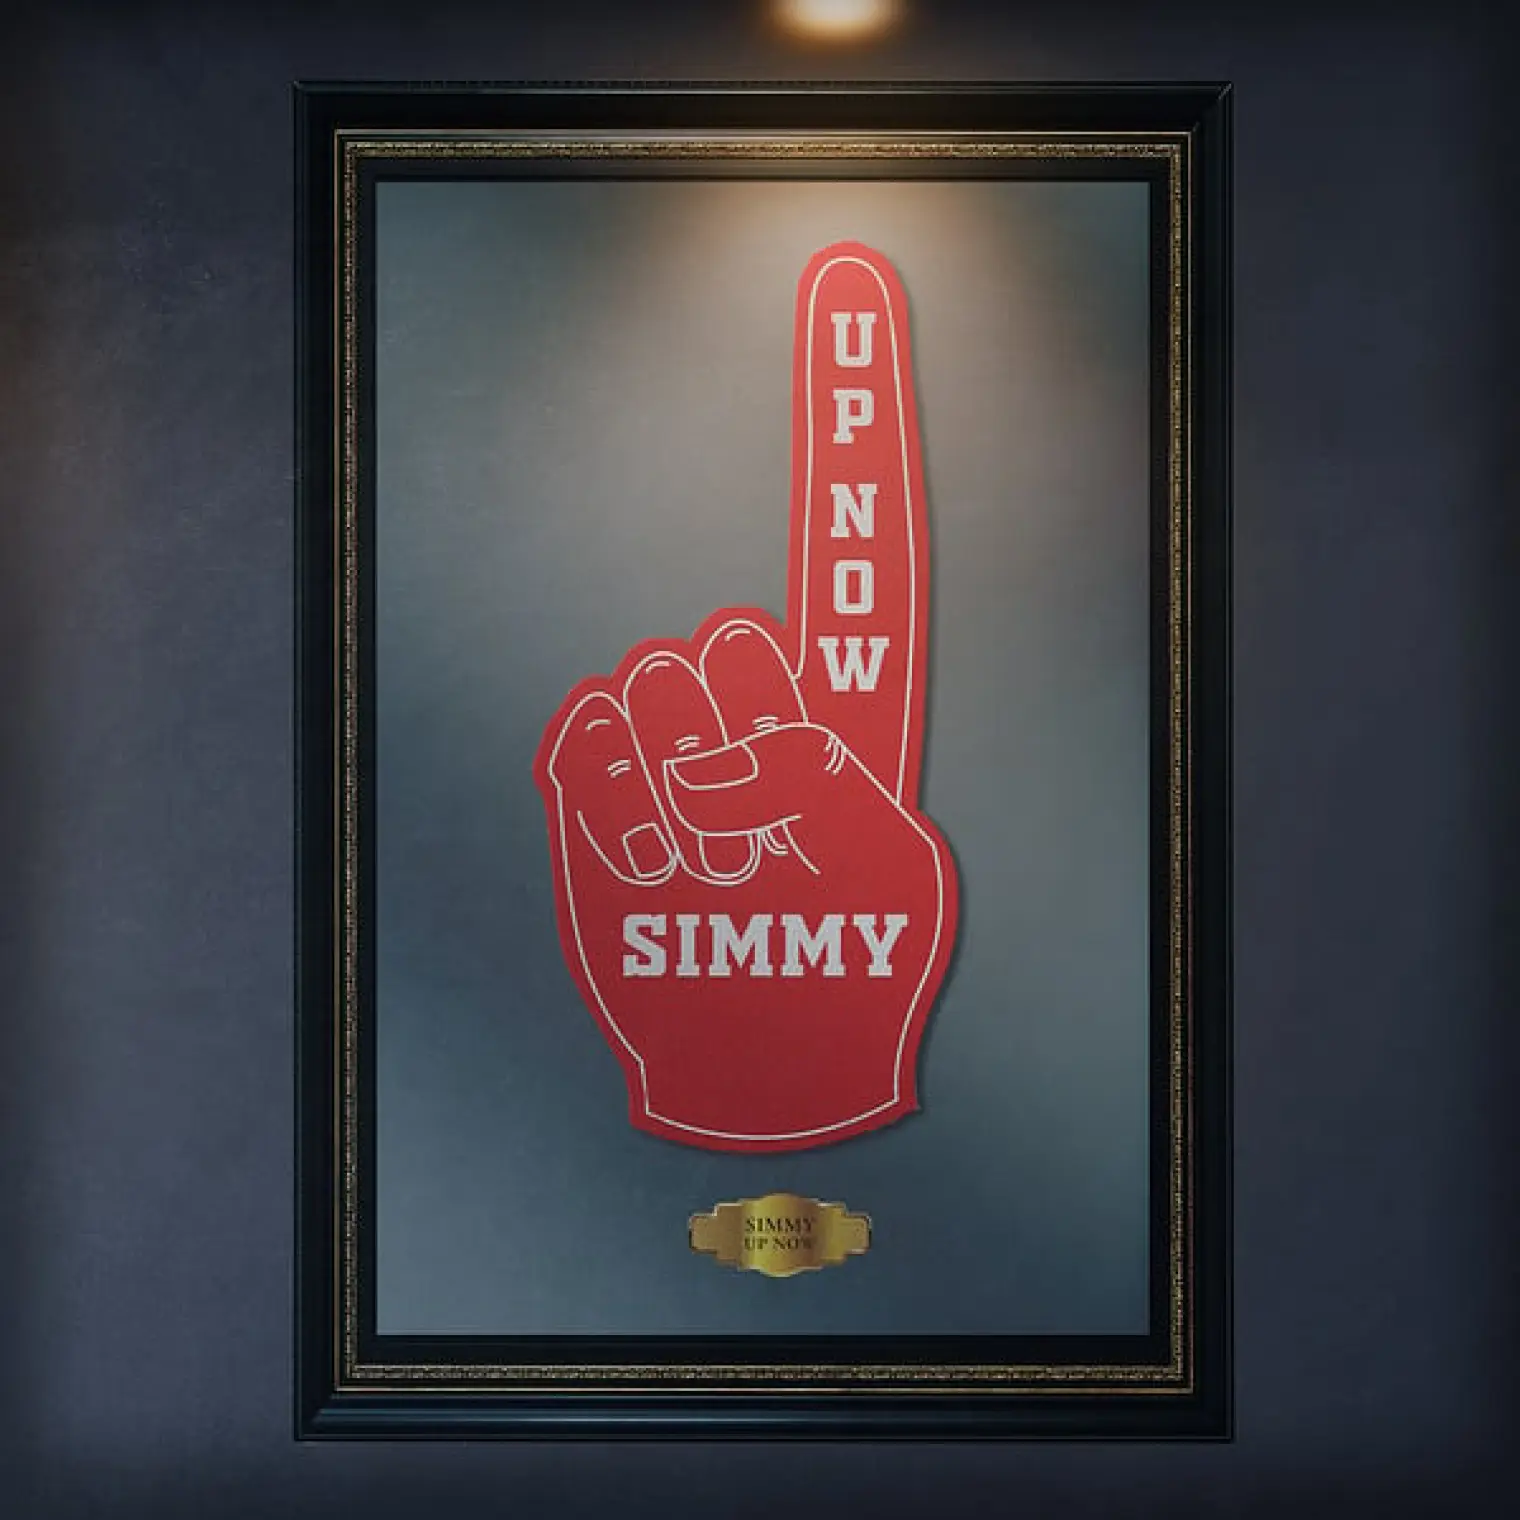 Up Now -  Simmy 